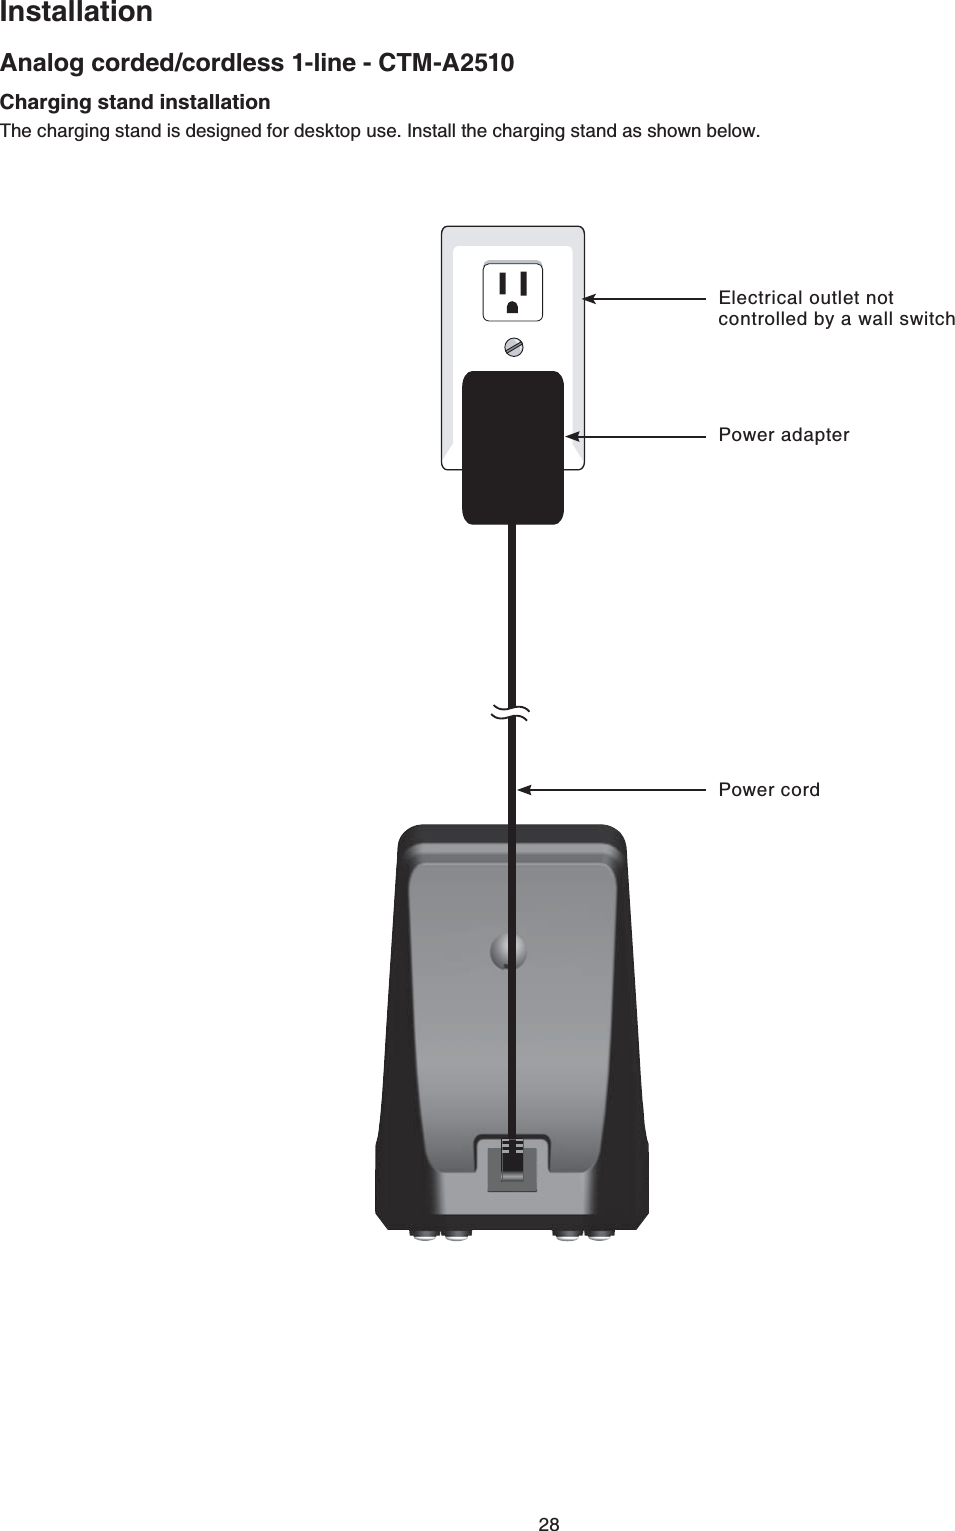 28InstallationAnalog corded/cordless 1-line - CTM-A2510Charging stand installationThe charging stand is designed for desktop use. Install the charging stand as shown below.Power adapterElectrical outlet not controlled by a wall switchPower cord